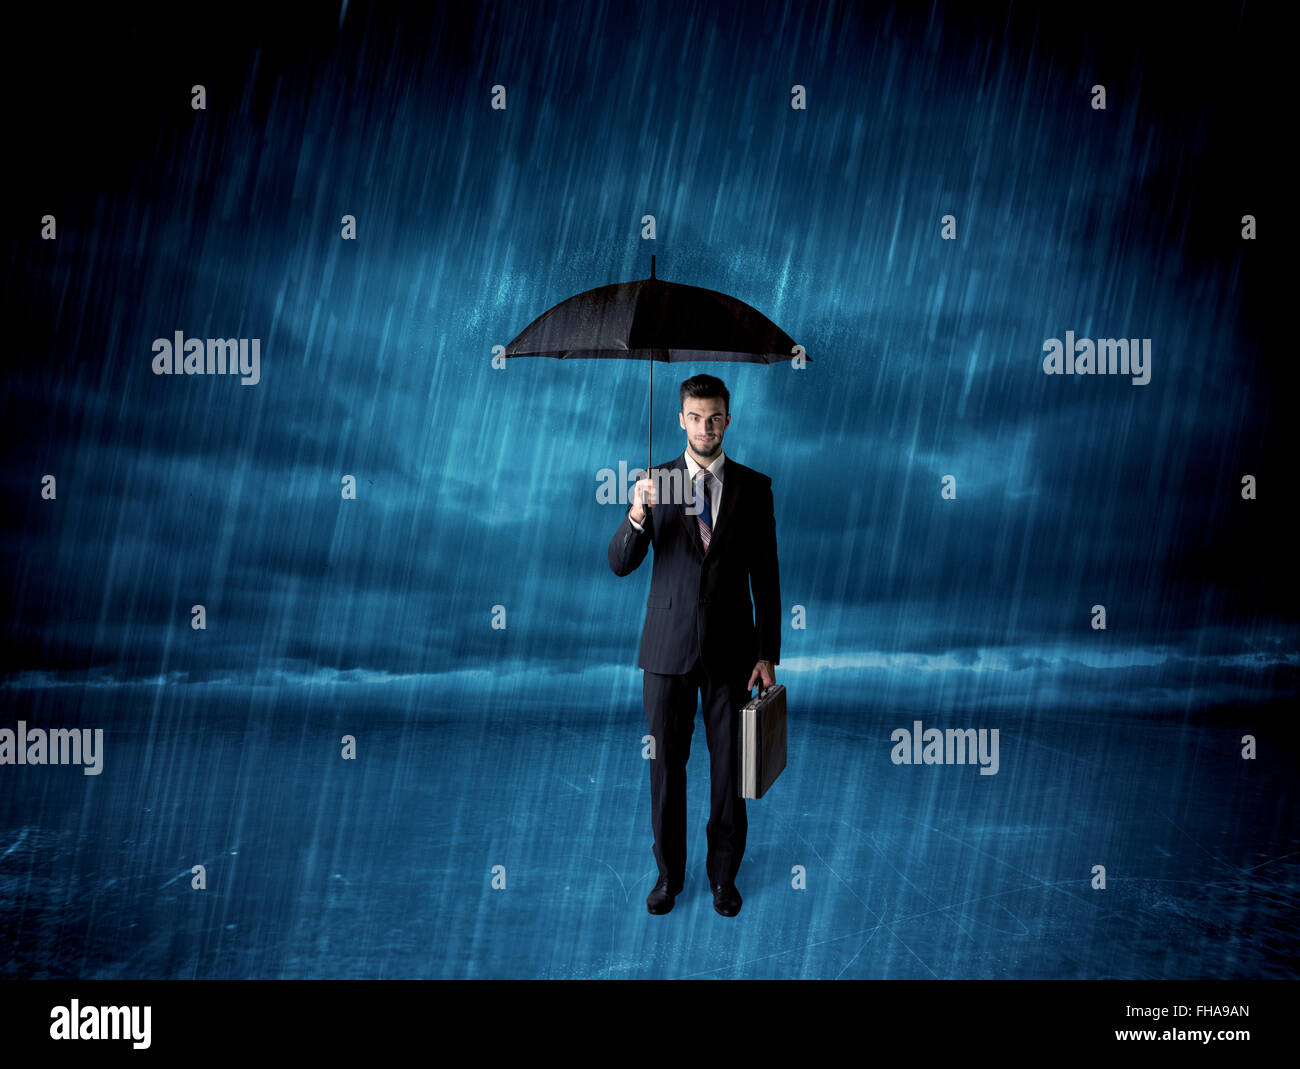 Business man standing in rain with an umbrella Stock Photo